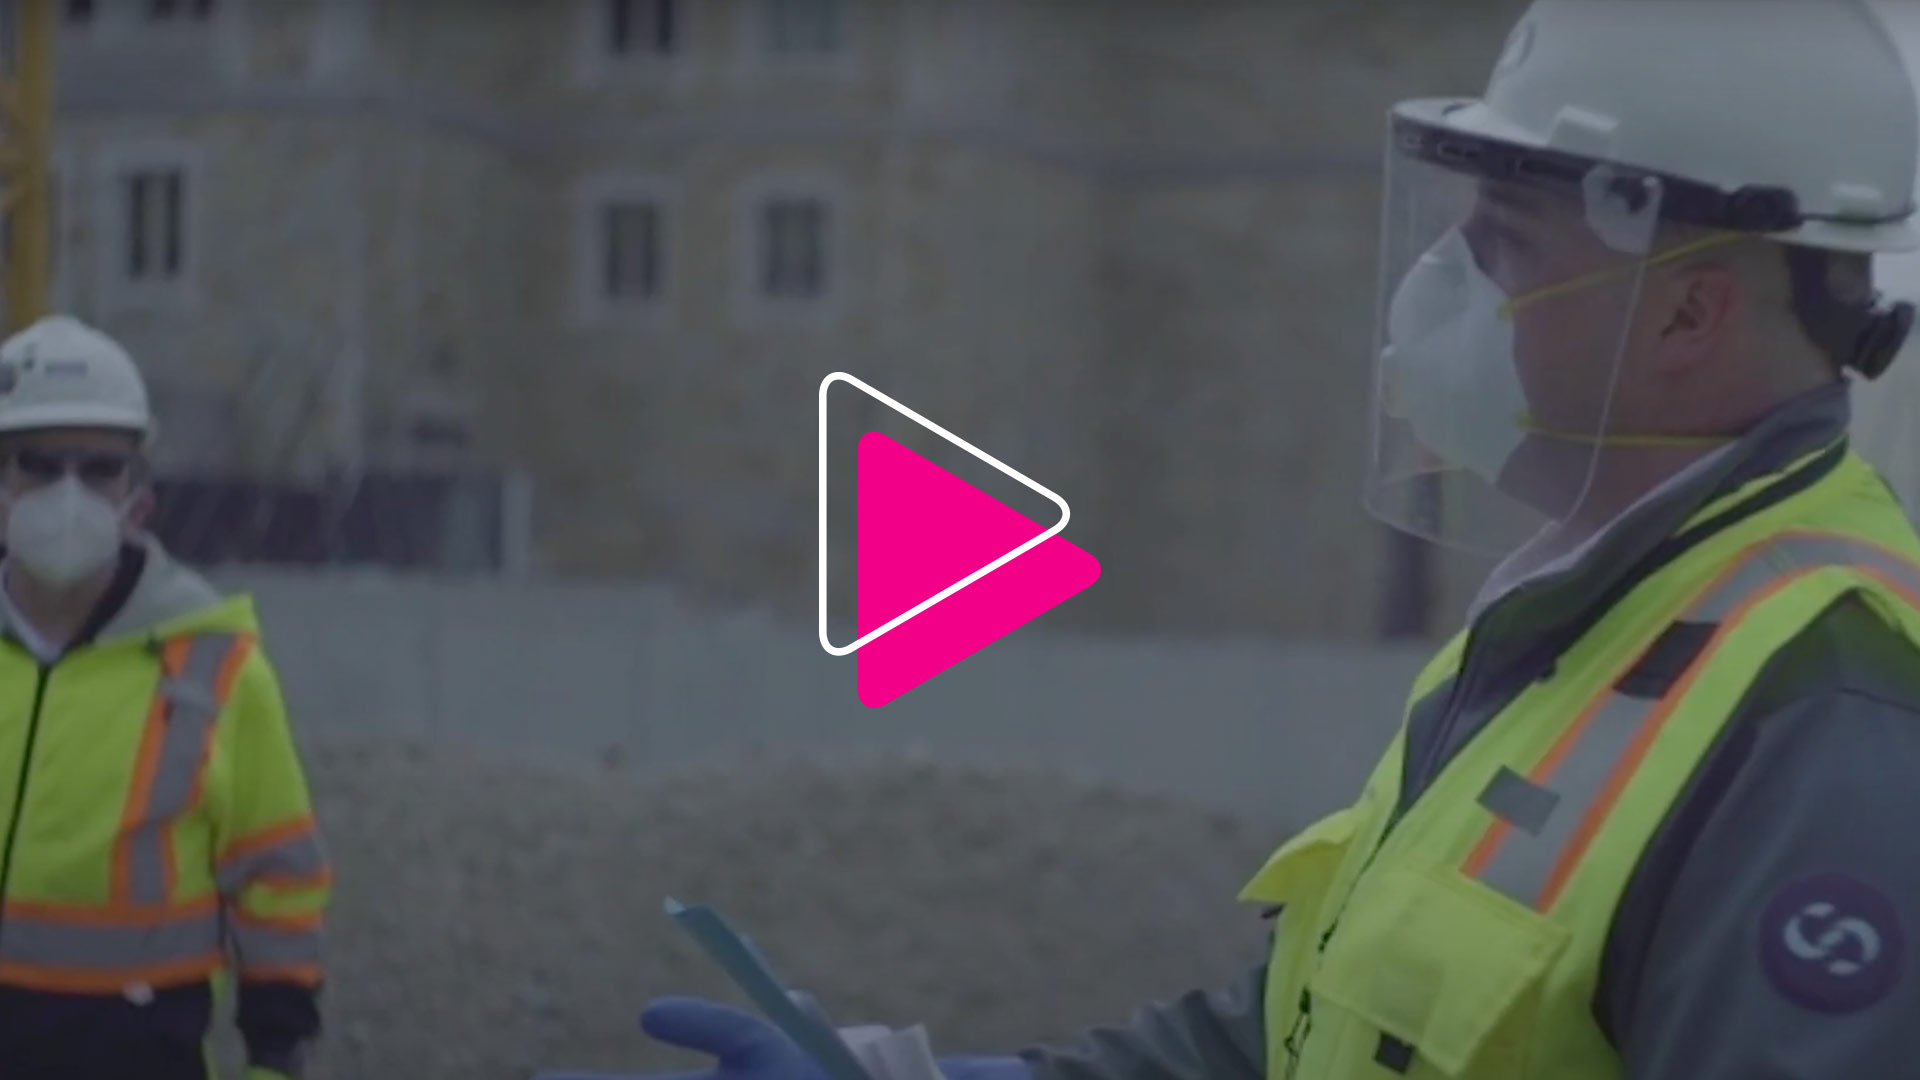 How Suffolk Construction Used Fuse To Bring Their Entire Workforce Back Safely During COVID-19